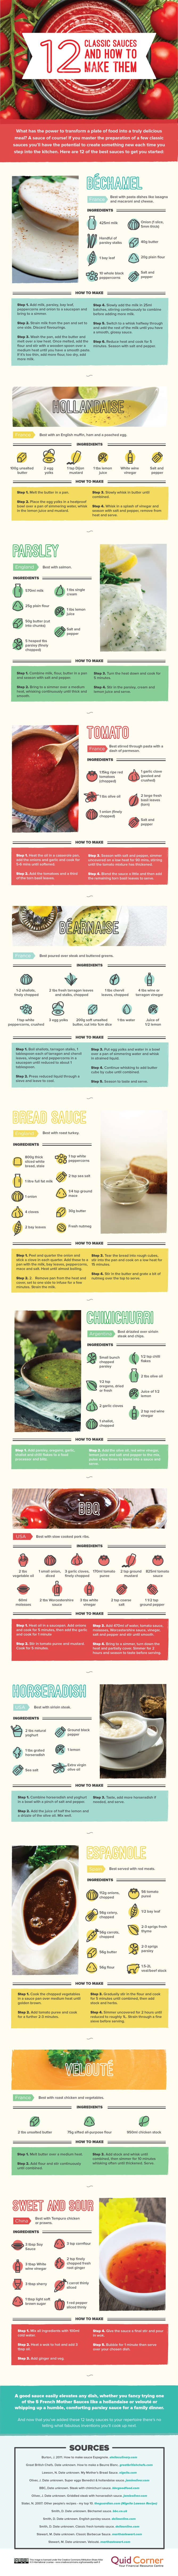 12-classic-sauces-and-how-to-make-them-DV3.png